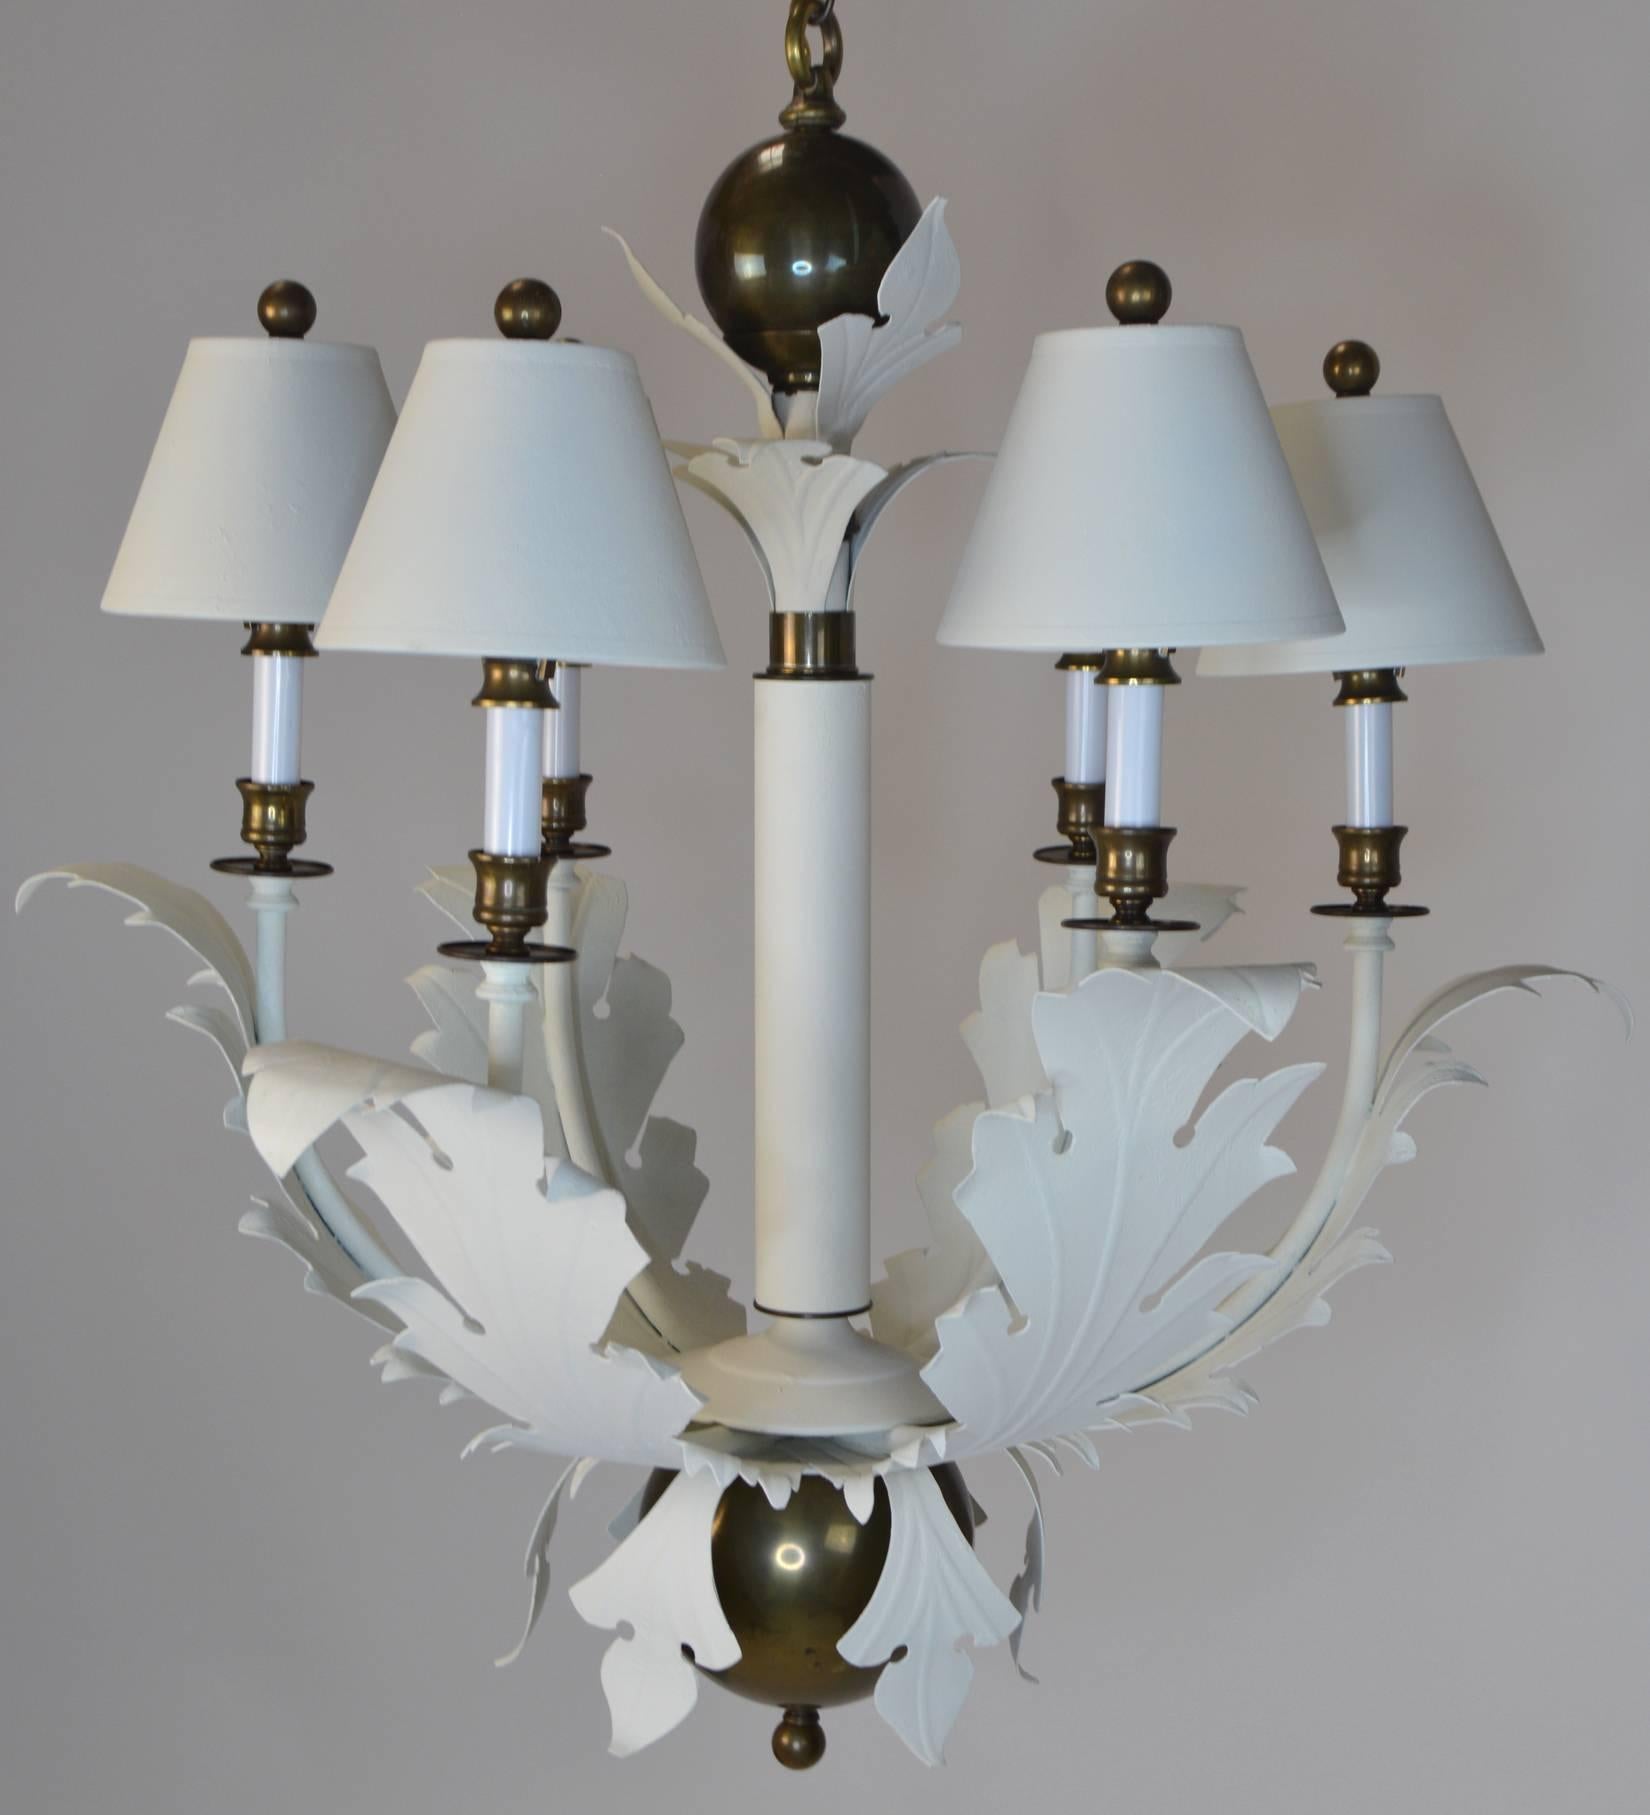 A 1980s, Glam chandelier by Hart Lighting, in the form of a central shaft and six scrolling leaf arms holding brass accented candle sockets. With original shades and brass mounts and finials.